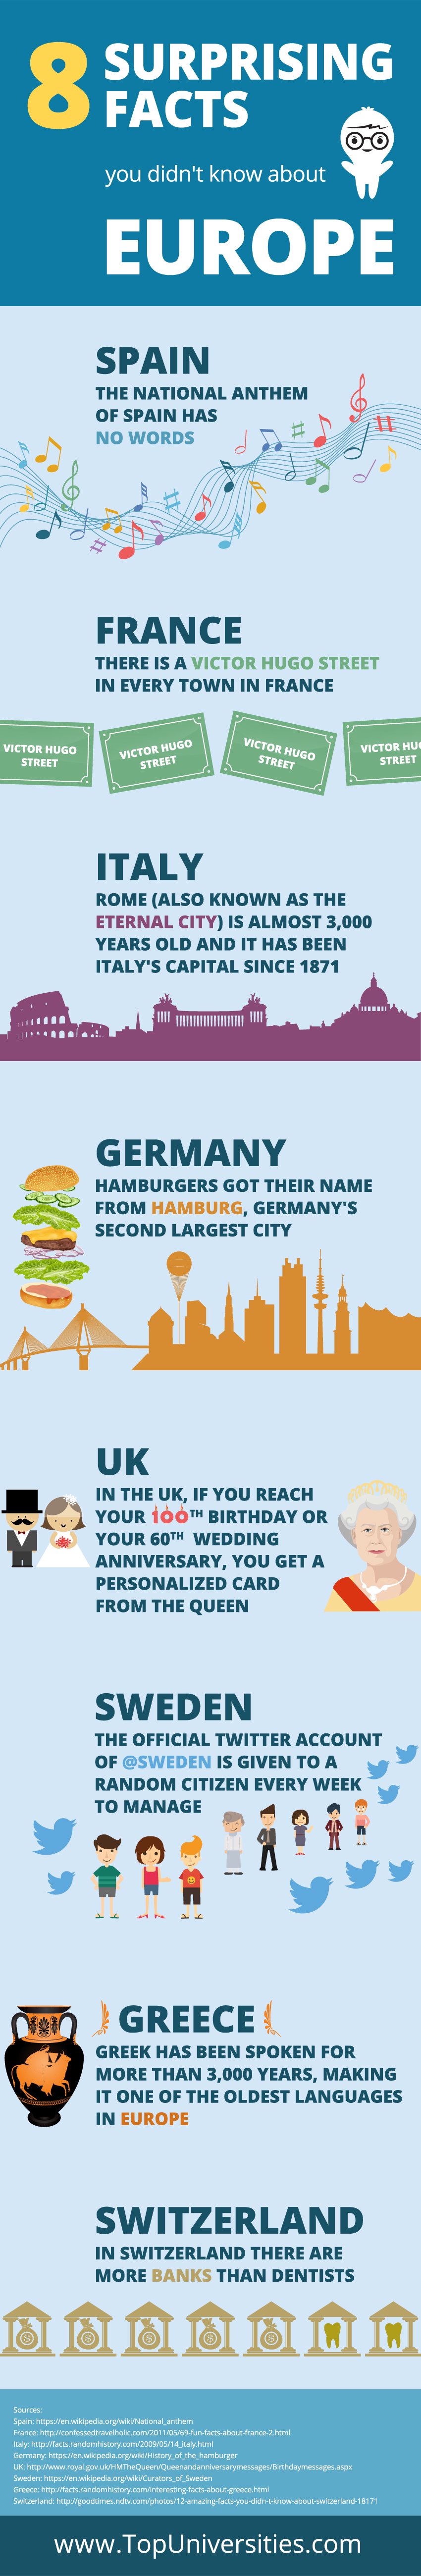 Europe_infographic_fun facts